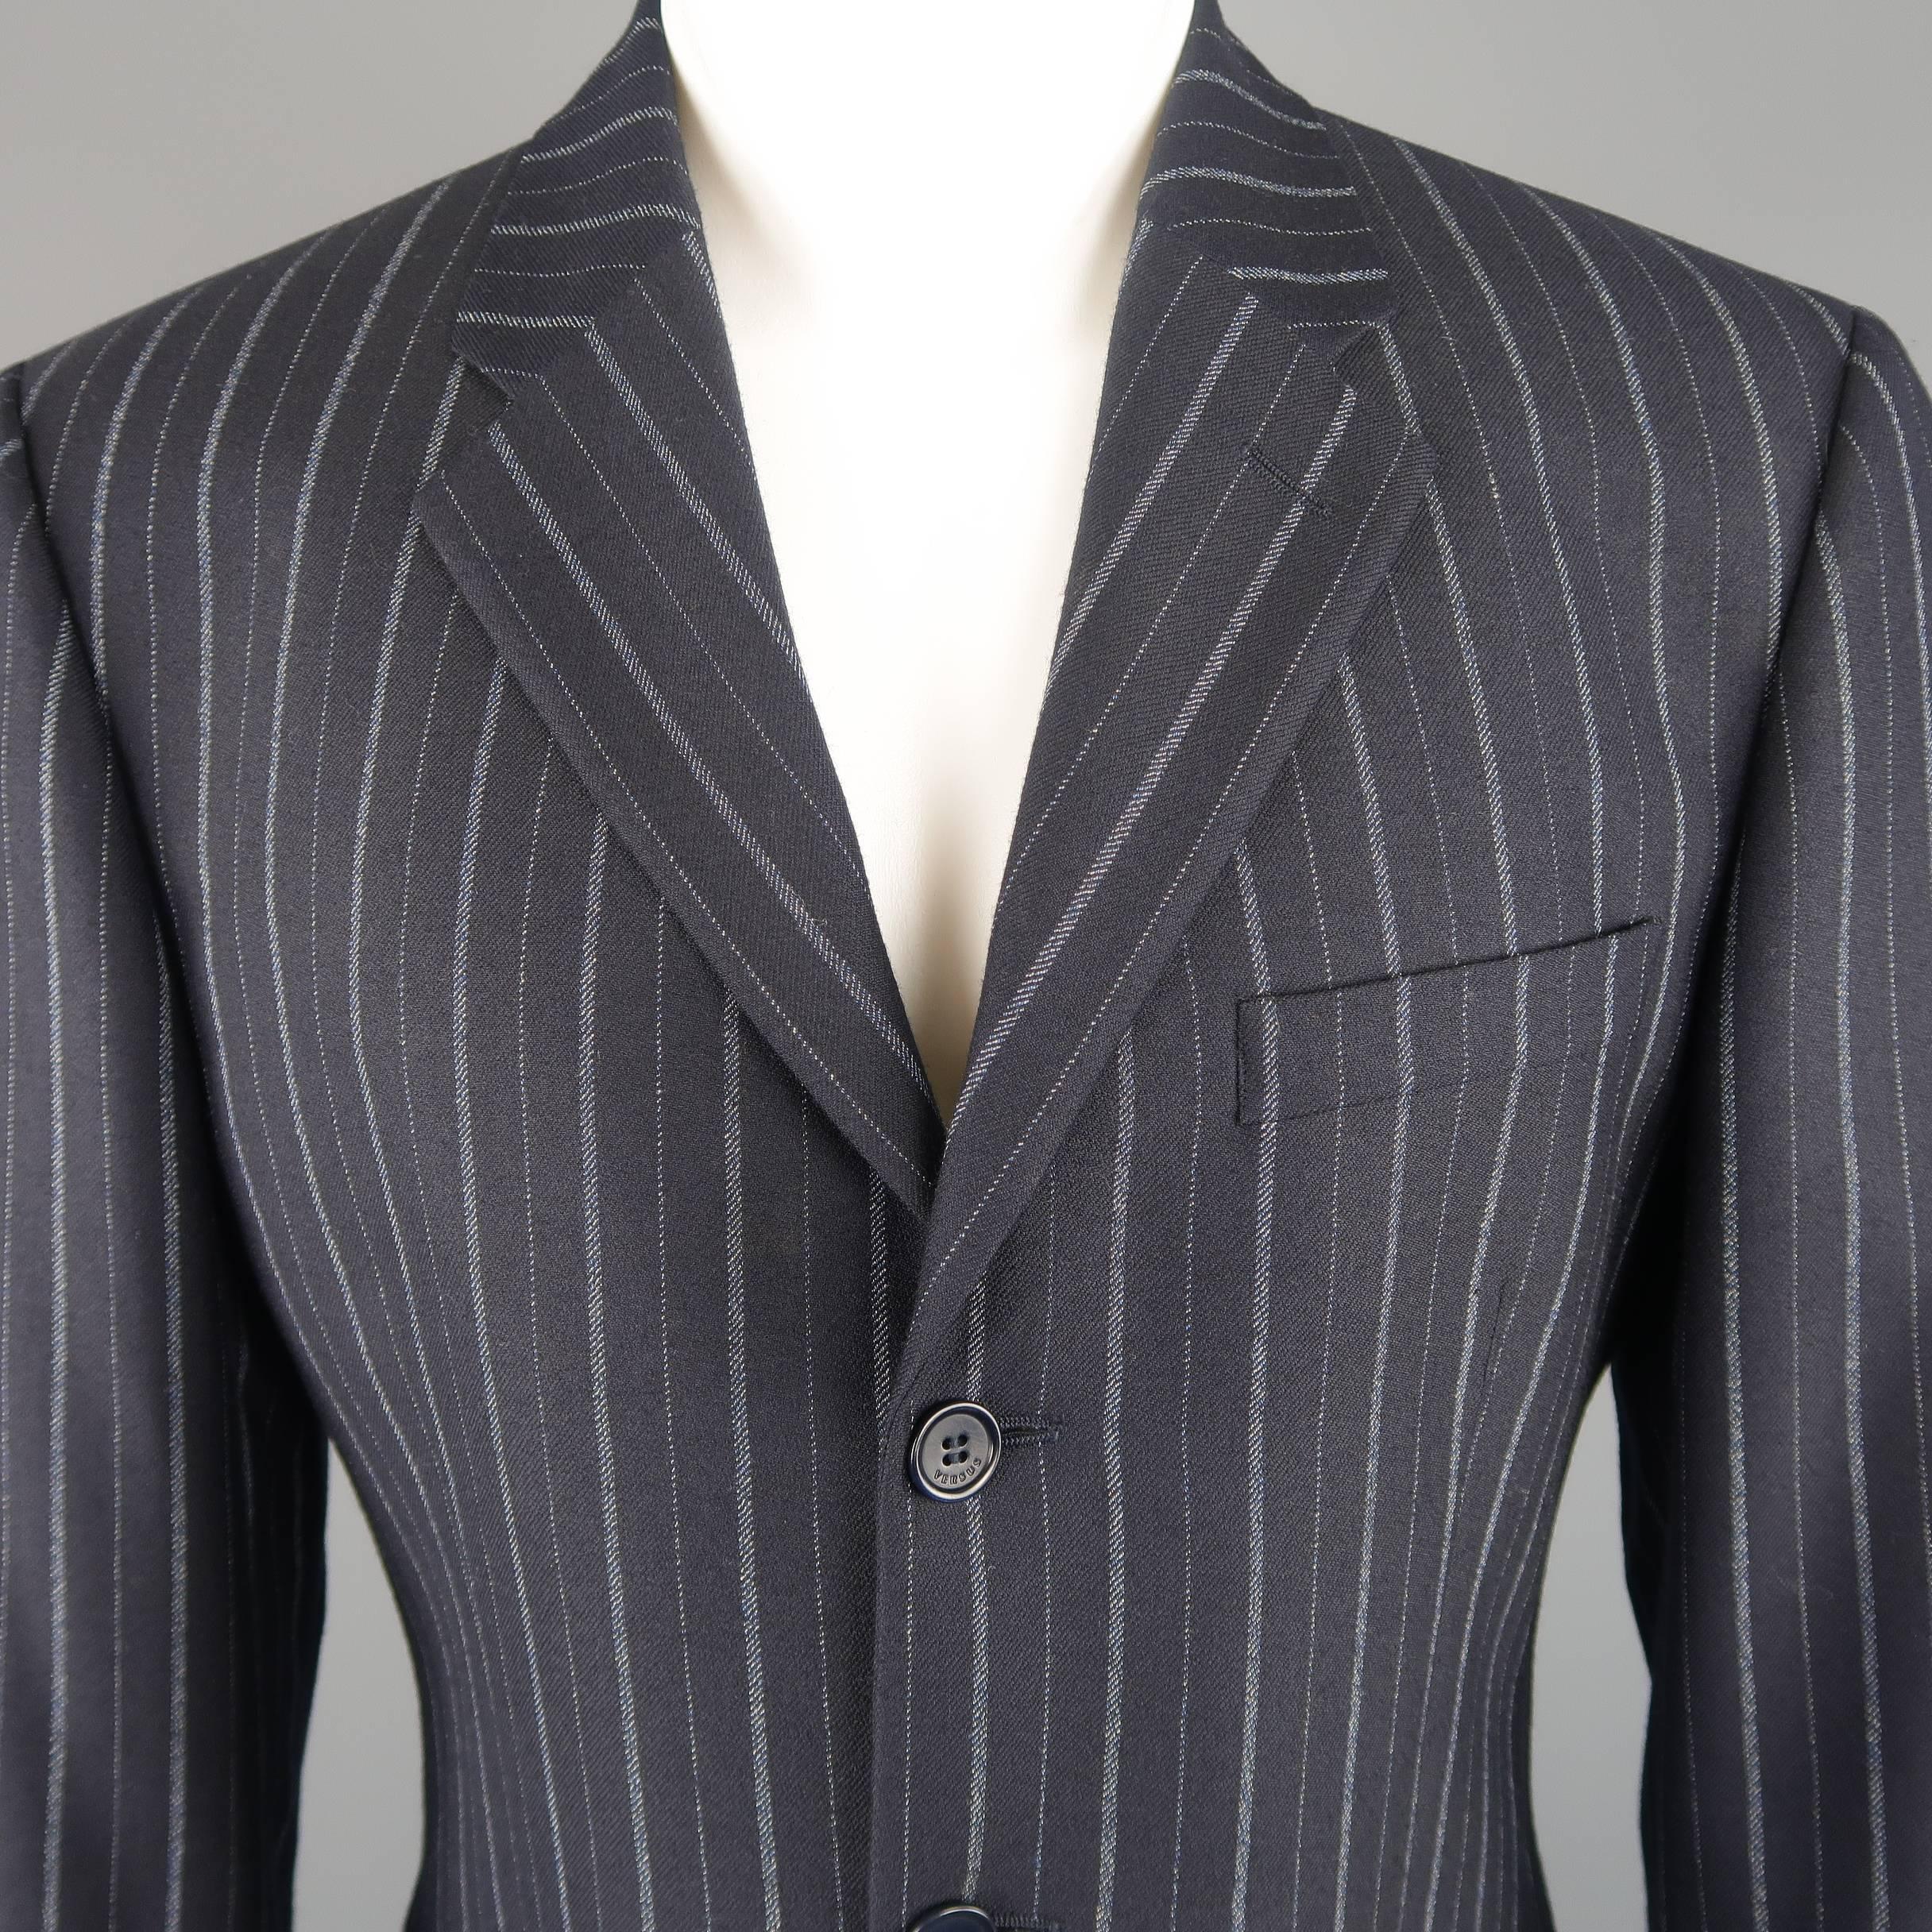 Single breasted VERSUS by GIANNI VERSACE sport coat comes in navy wool twill with pinstripe pattern, notch lapel, three button front, and double vented back. Made in Italy.
 
Excellent Pre-Owned Condition.
Marked: IT 50
 
Measurements:
 Shoulder: 18